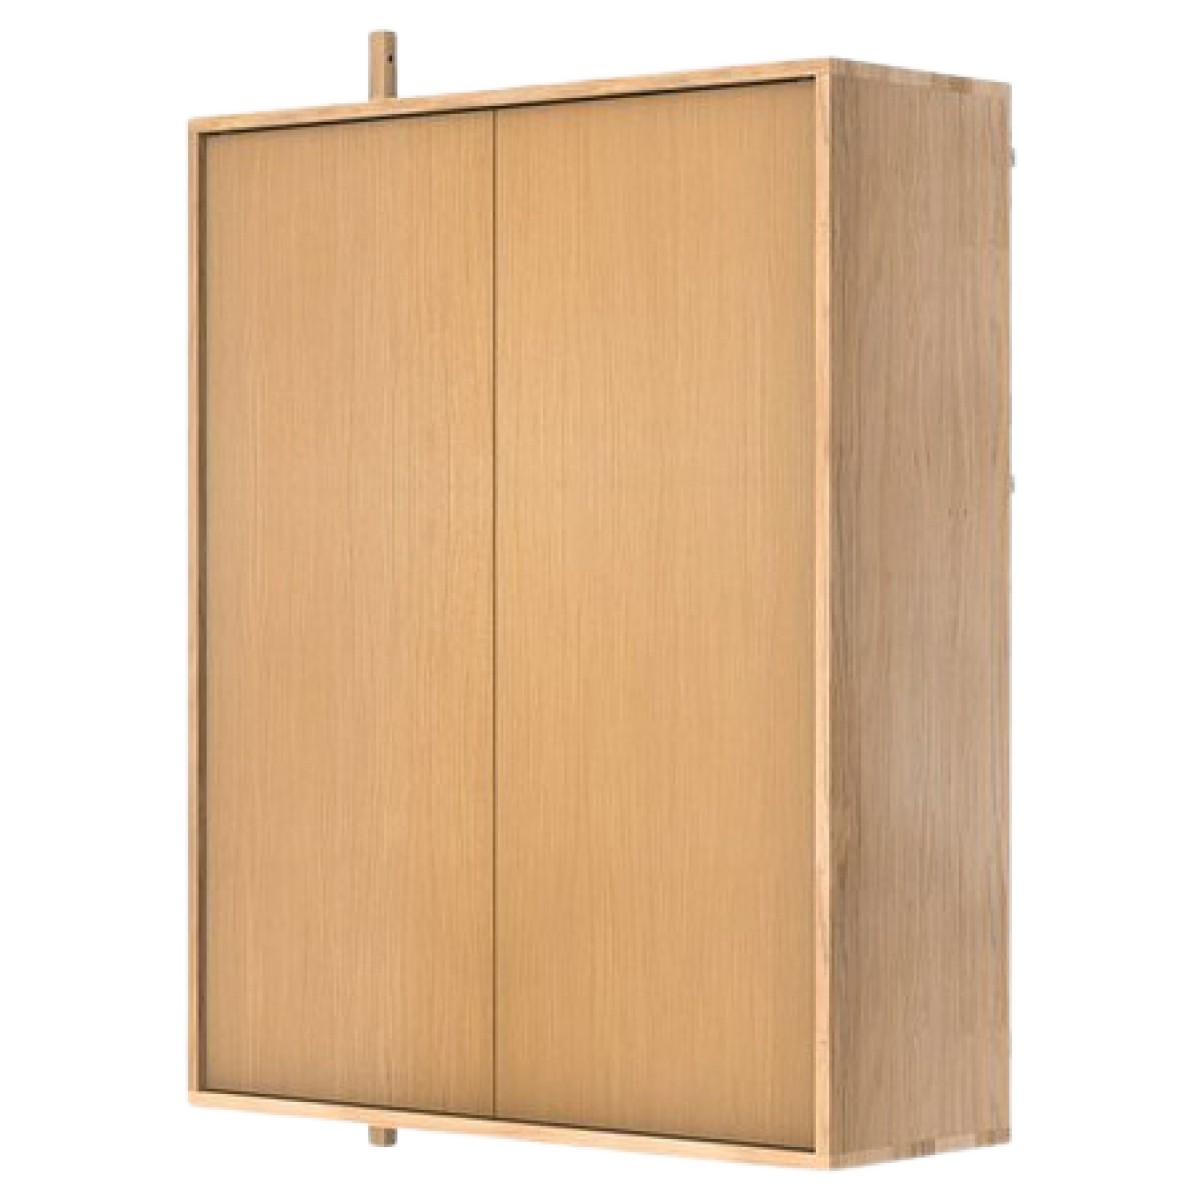 Shelf Library H1148 - Cabinet Add-on Section L